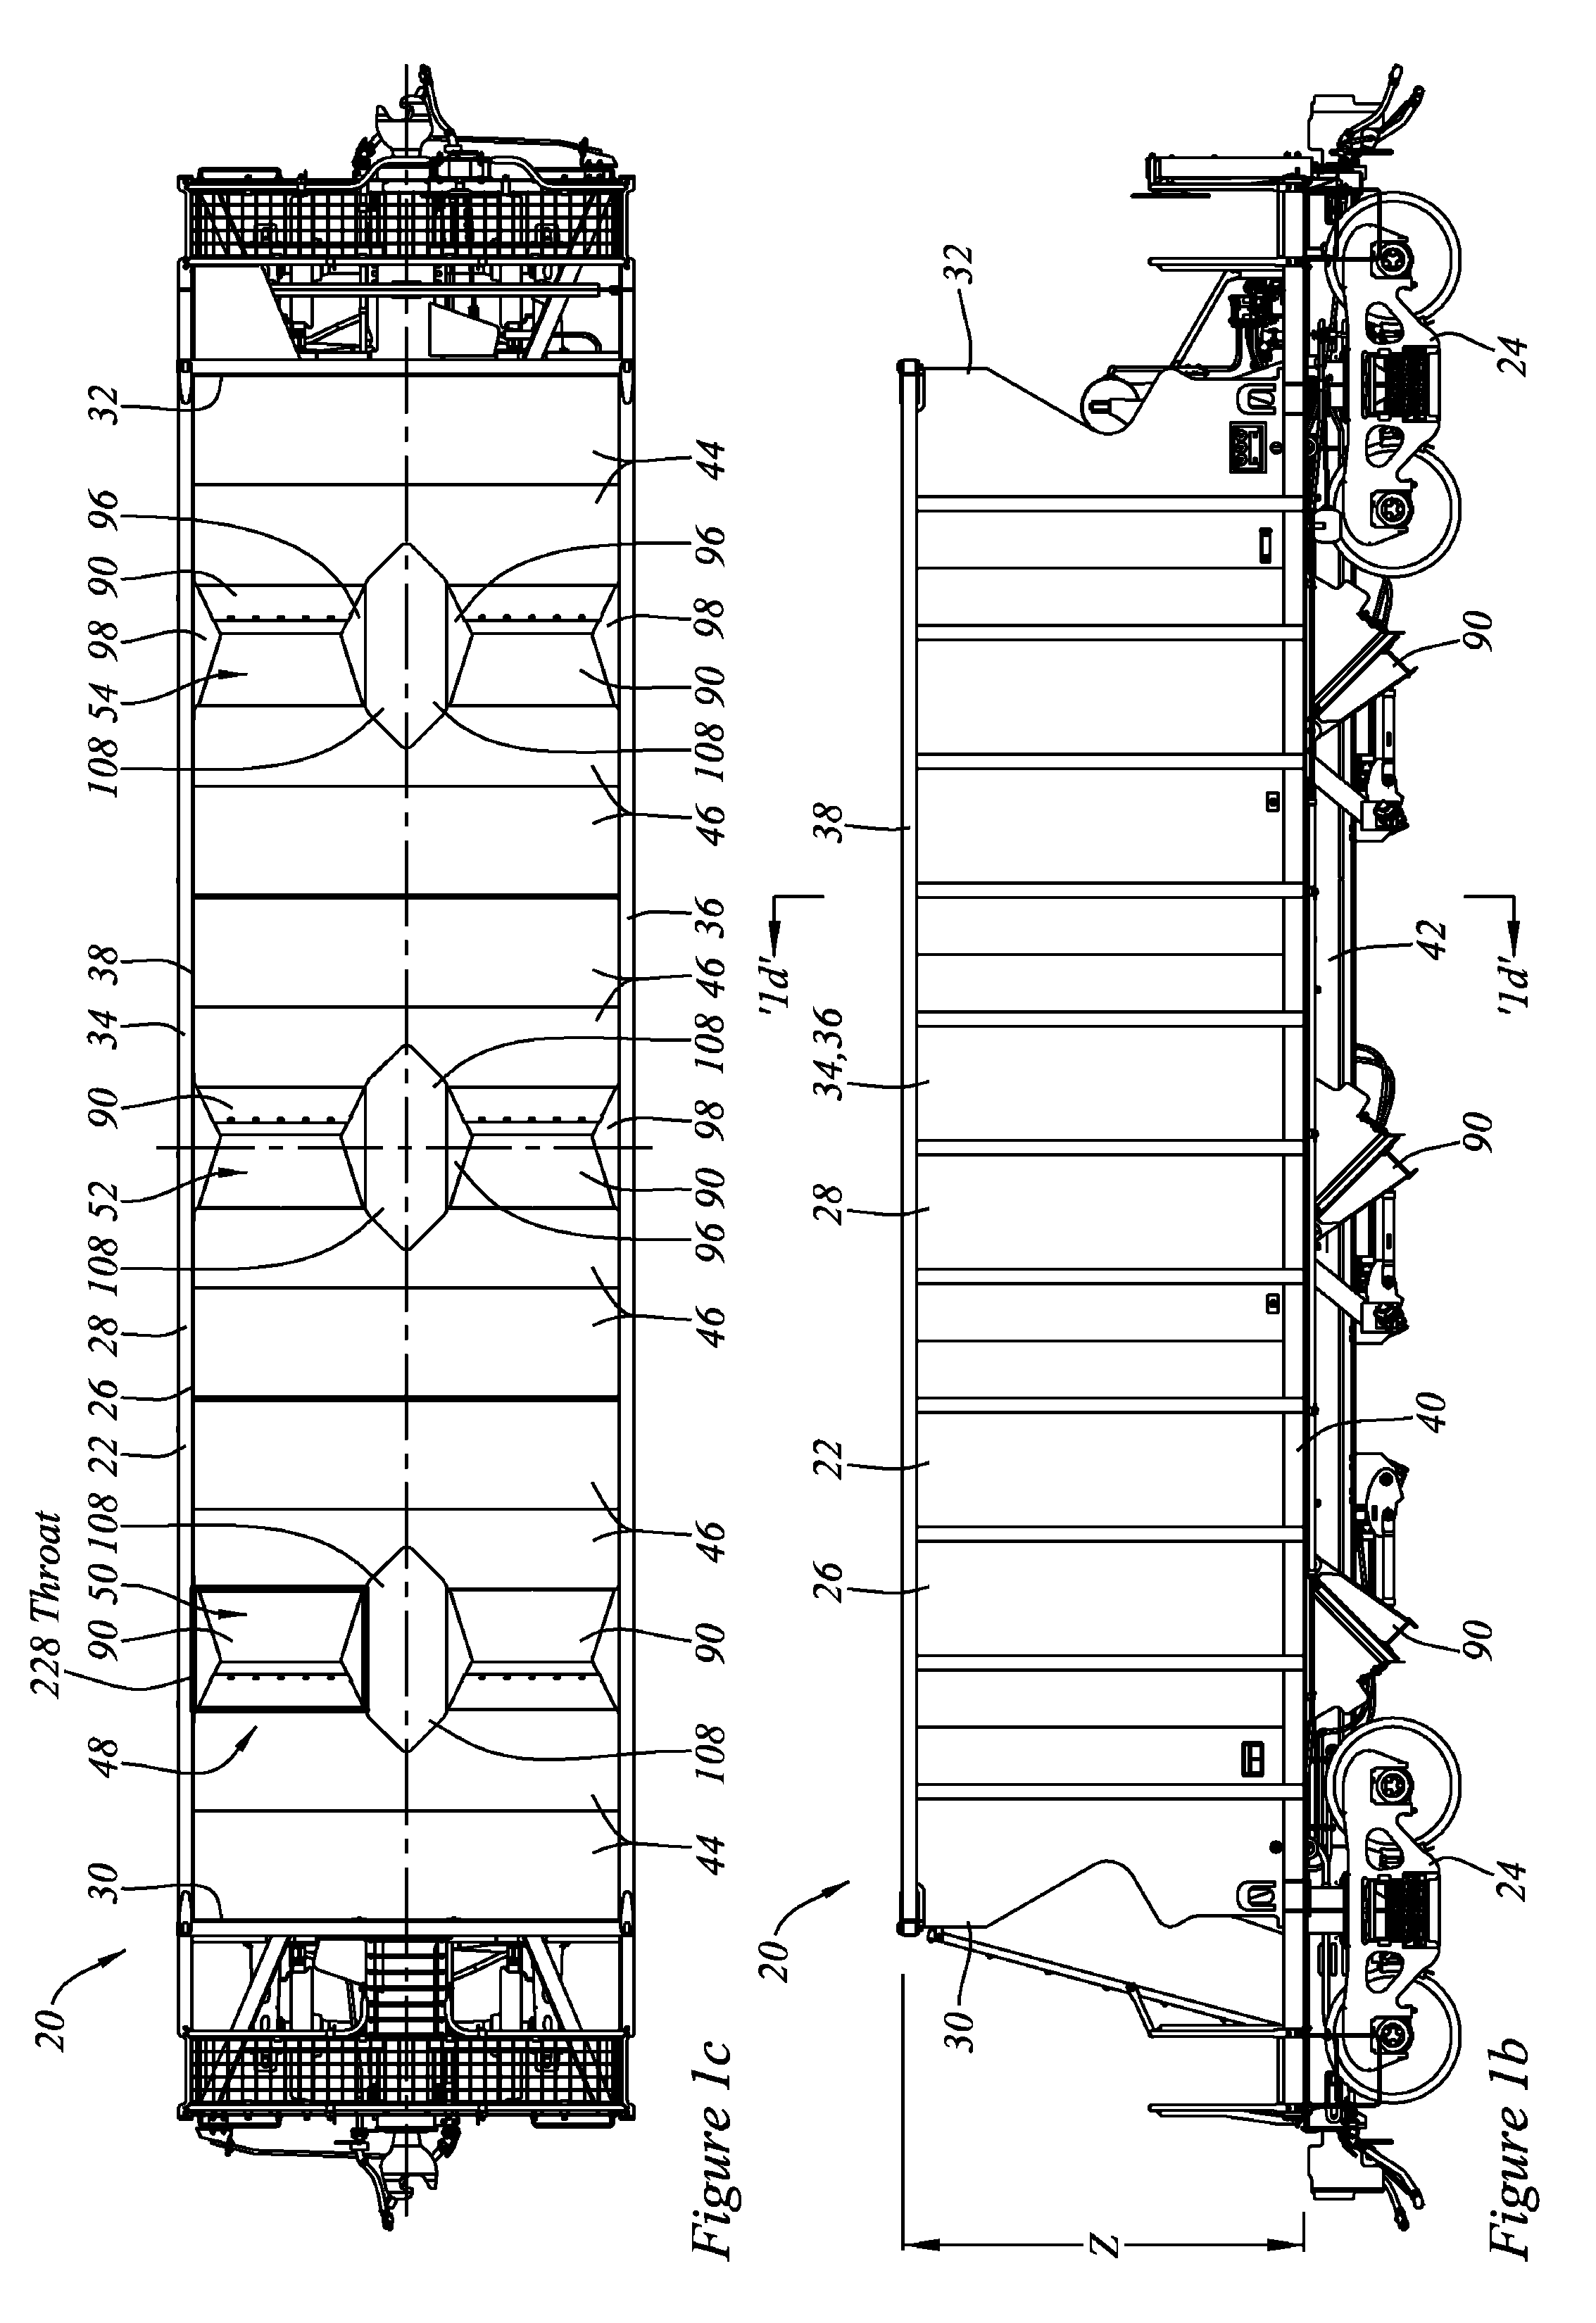 Hopper car with lading dislodgement fittings and method of operation